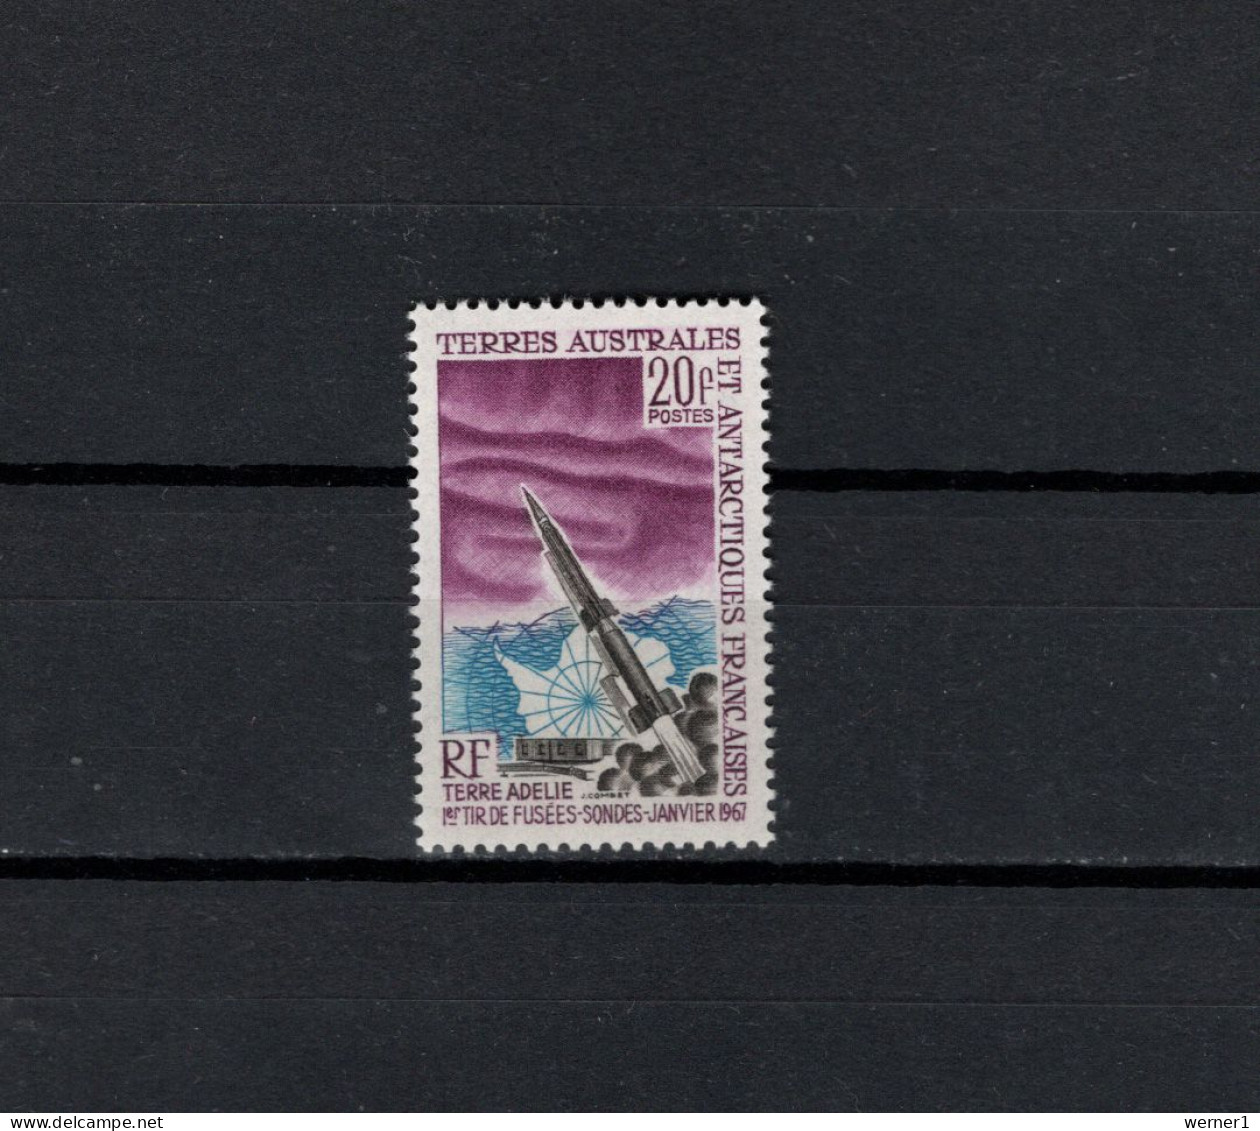 FSAT French Antarctic Territory 1967 Space, Dragon Rocket Stamp MNH - Ozeanien